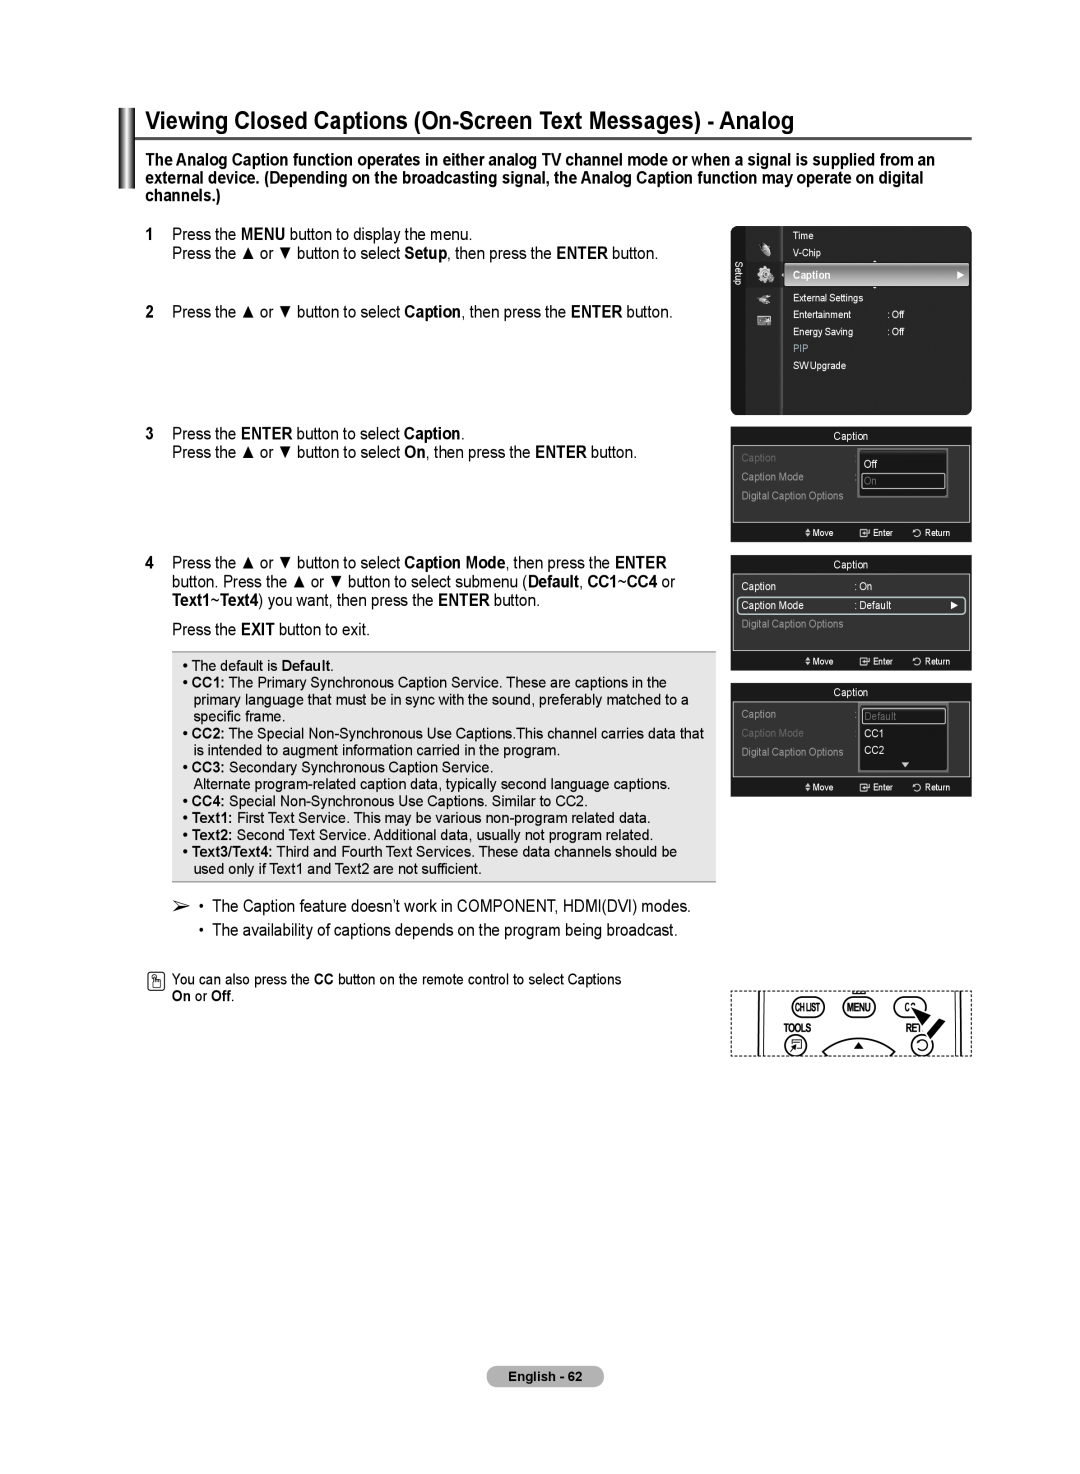 Samsung 510 user manual Viewing Closed Captions On-Screen Text Messages - Analog, On or Off 